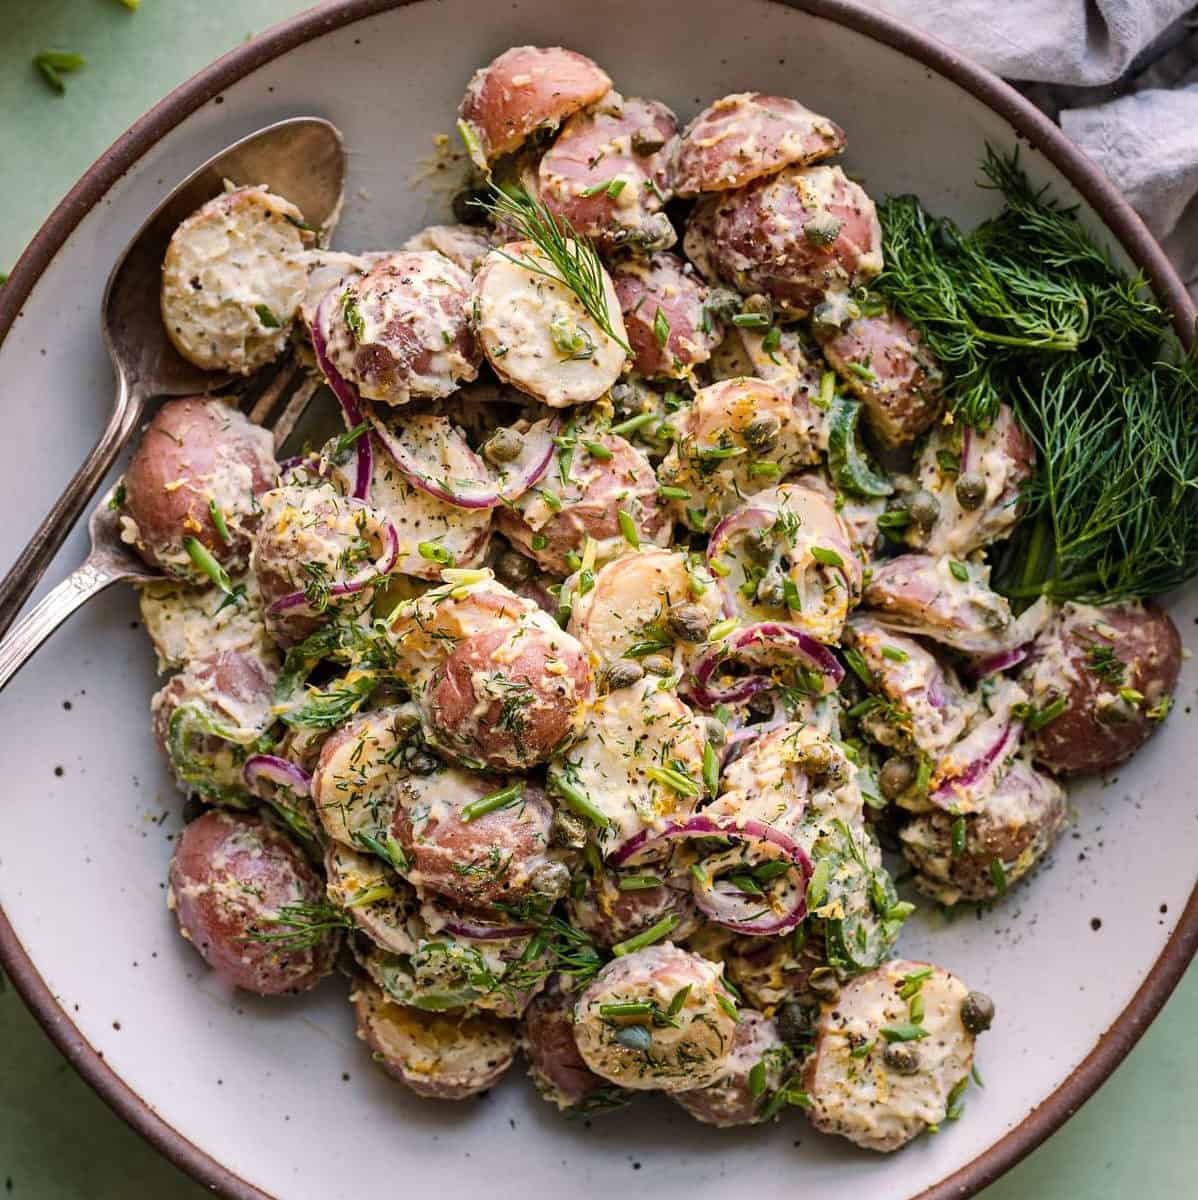  This dish proves that you don't need mayonnaise to make a delicious potato salad.